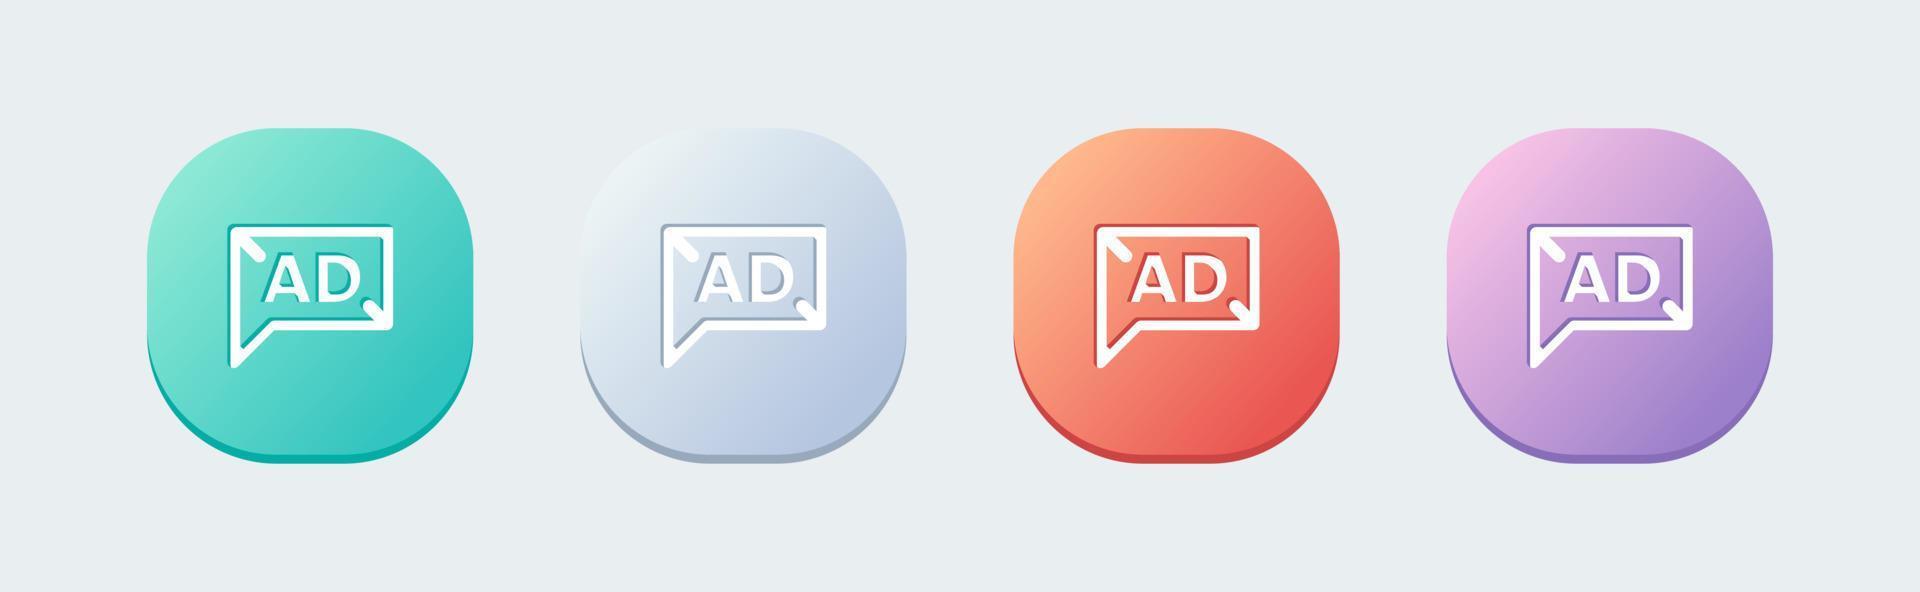 Ad line icon in flat design style. Advertisement signs vector illustration.